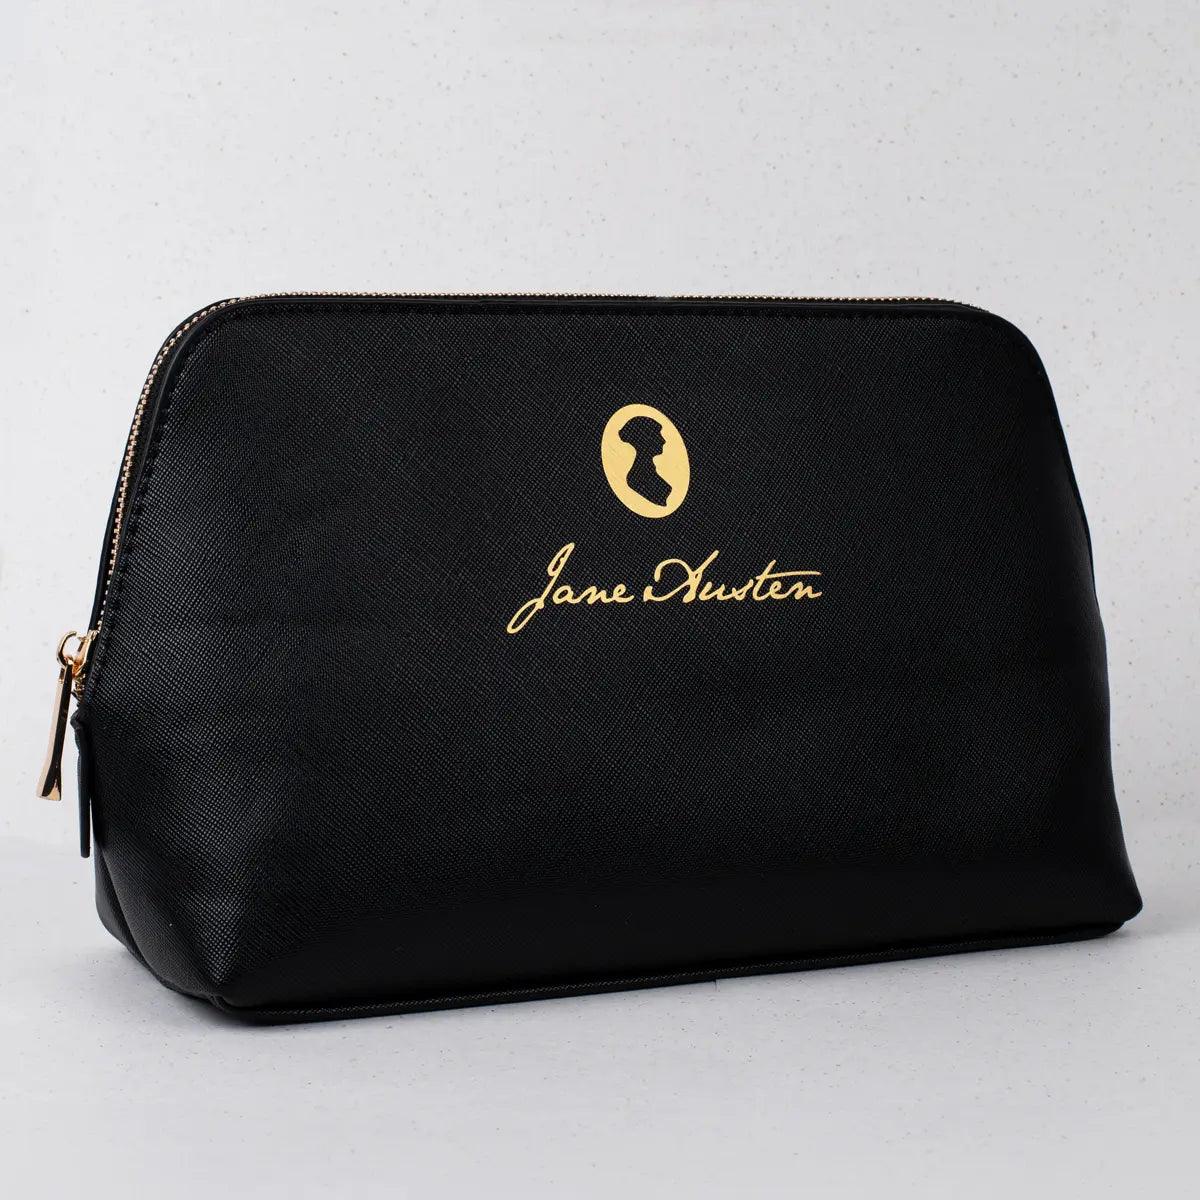 A faux leather cosmetics bag with Jane Austen's iconic signature and silhouette.